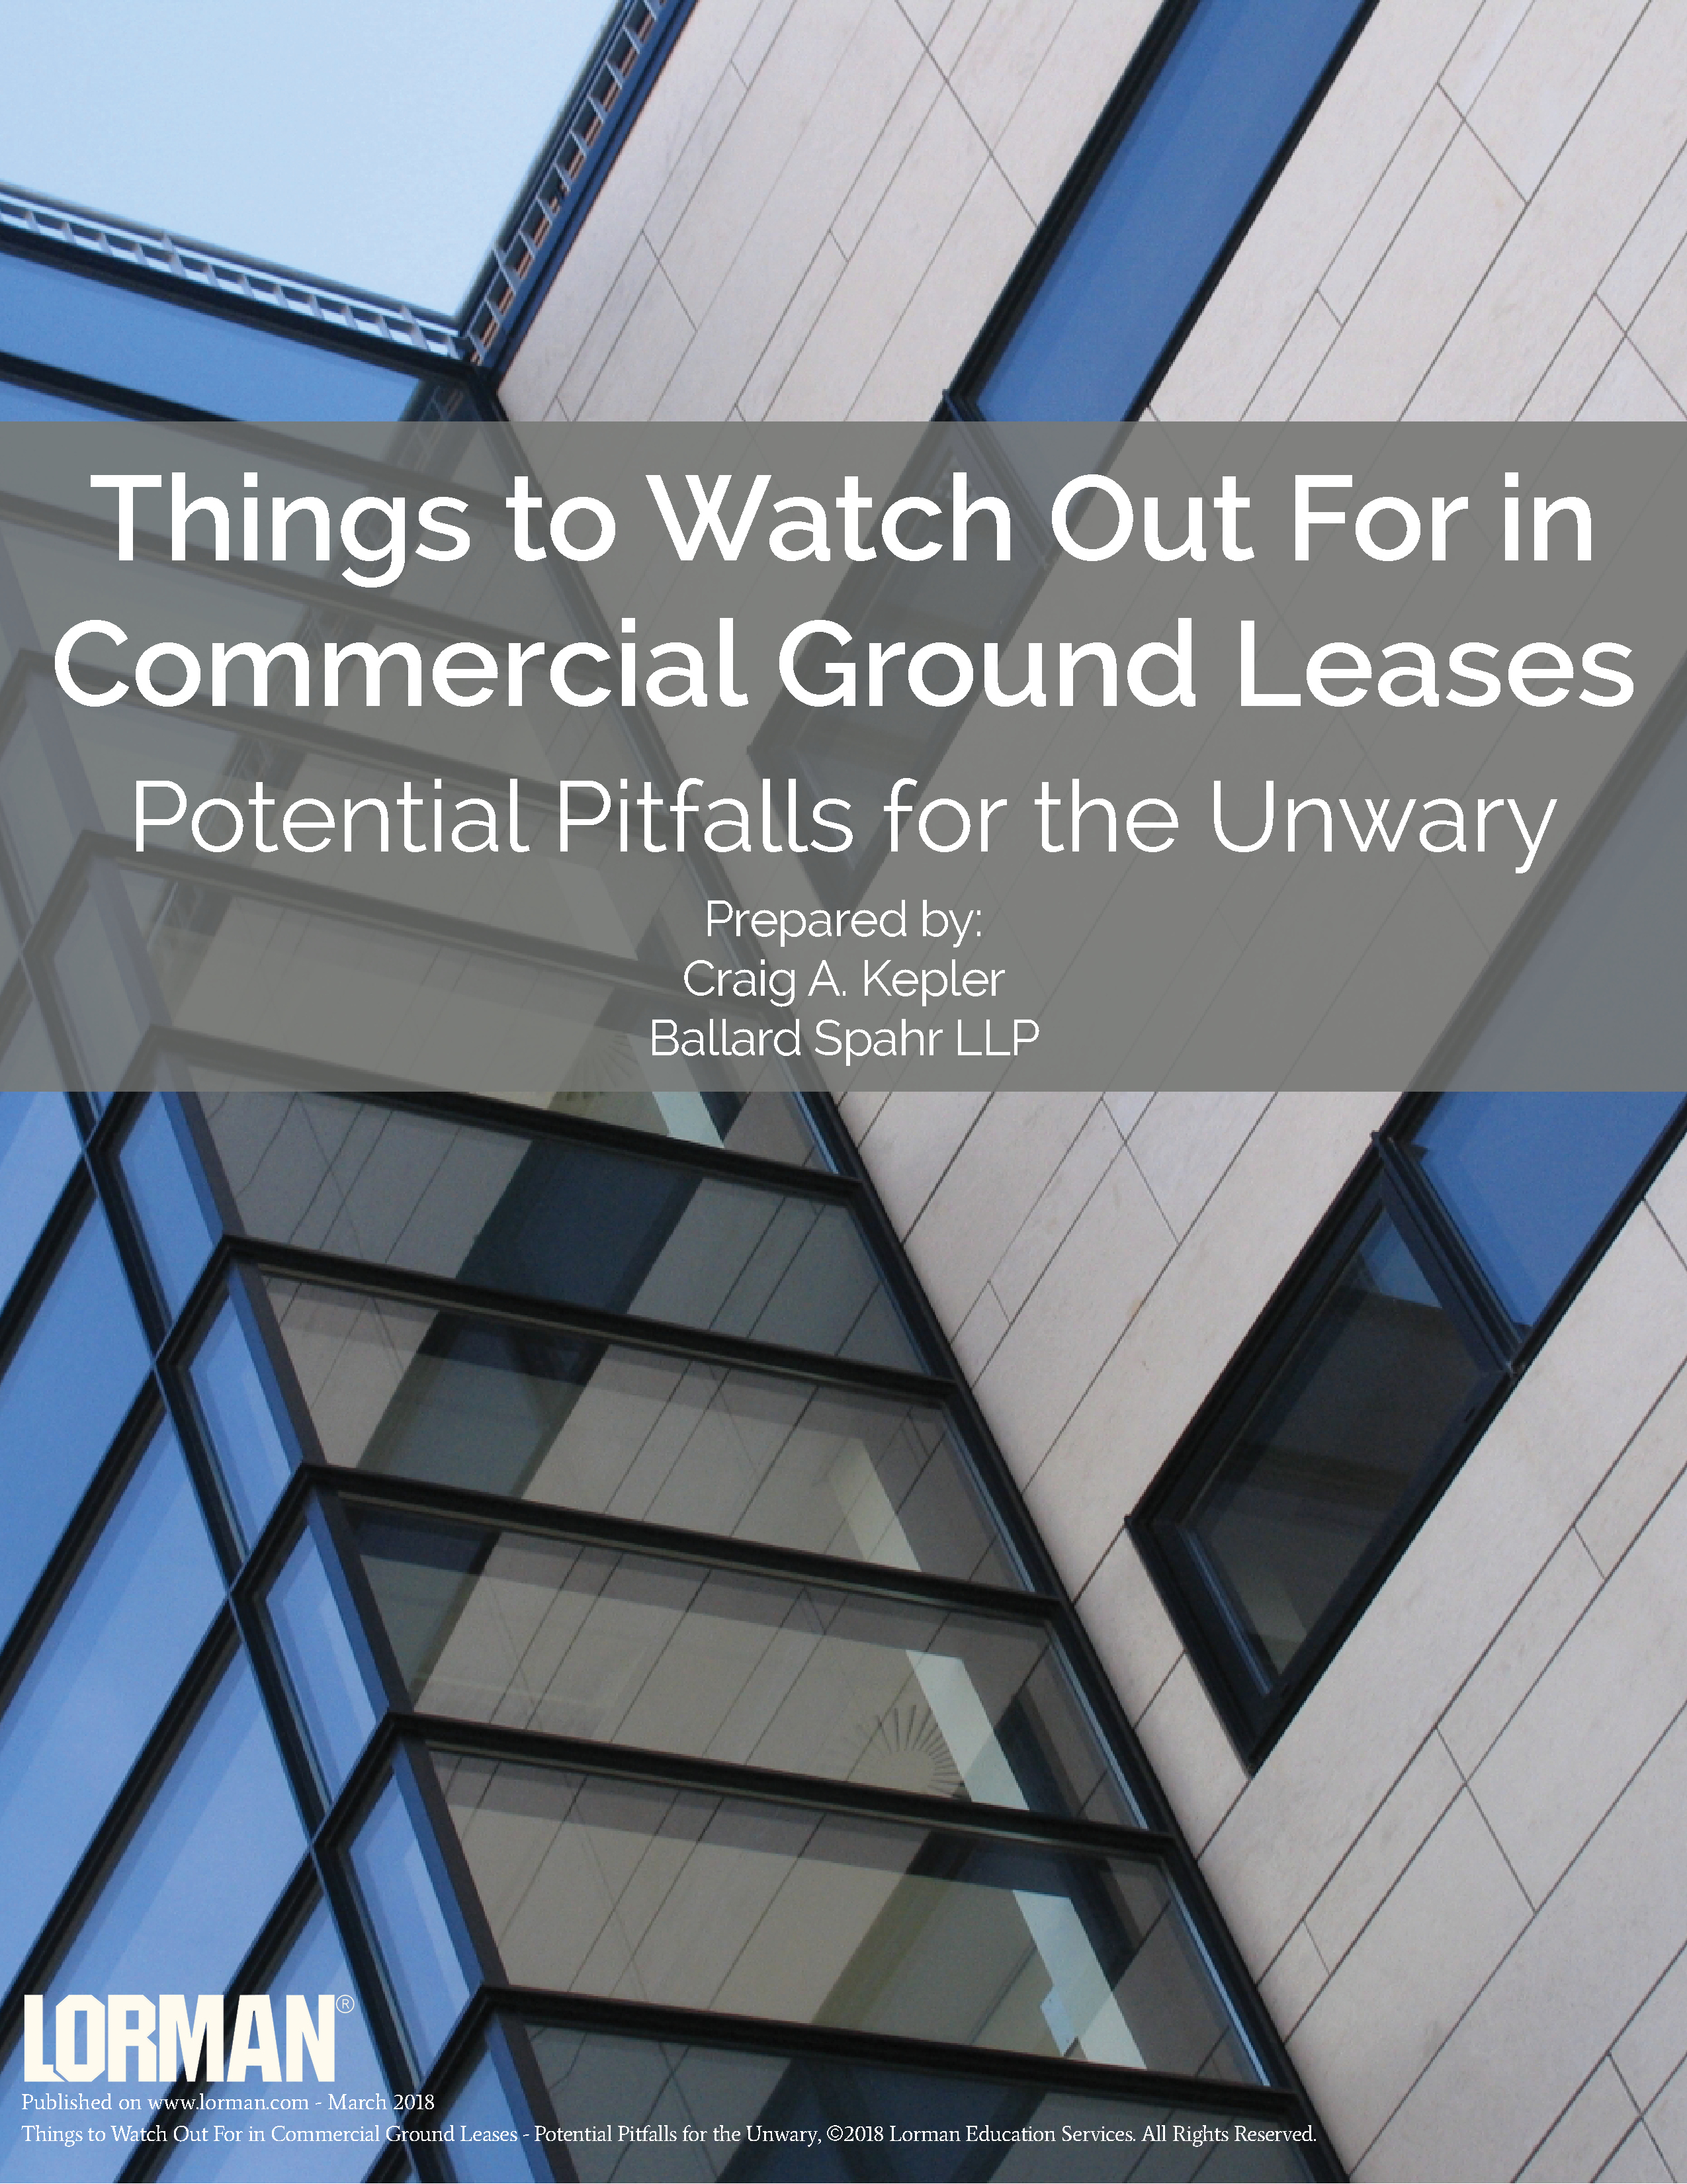 Things to Watch Out For in Commercial Ground Leases